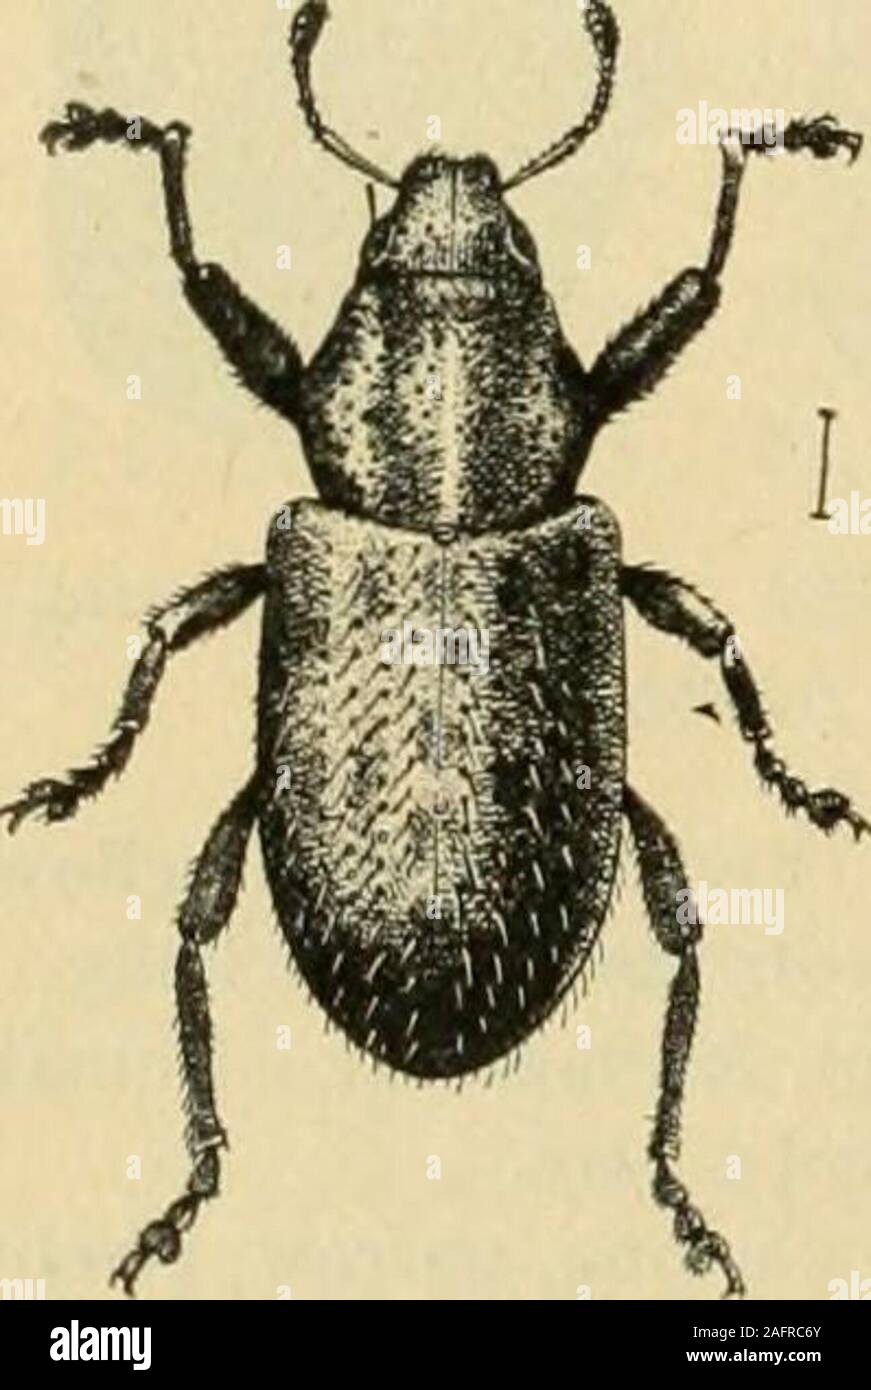 . A manual of dangerous insects likely to be introduced in the United States through importations. ANGEROUS INSECTS. Curculionidae. Orthorrhinus cylindrirostris Fabricius; Australia; bores in wood (French, Handbook Destr. Ins, Vic-toria, pt. 4, p. 82). Cratosomiis rcidi Kirby; Brazil; bores long tunnels in stems and trunks of orange. (Bol. Agric, ser. 15,pp. 1081-1092.) Diaprepcs abbreviatus Linnaeus; West Indies. (See Sugar cane.) LEPIDOPTERA.Pyralldae. Dichocrocis punctiferalis GufSnee; Queensland. (See Corn.) Papilionidse. Papilio idmus Fabricius; Brazil; feeds on foliage. DIPTERA.Trypetlda Stock Photo